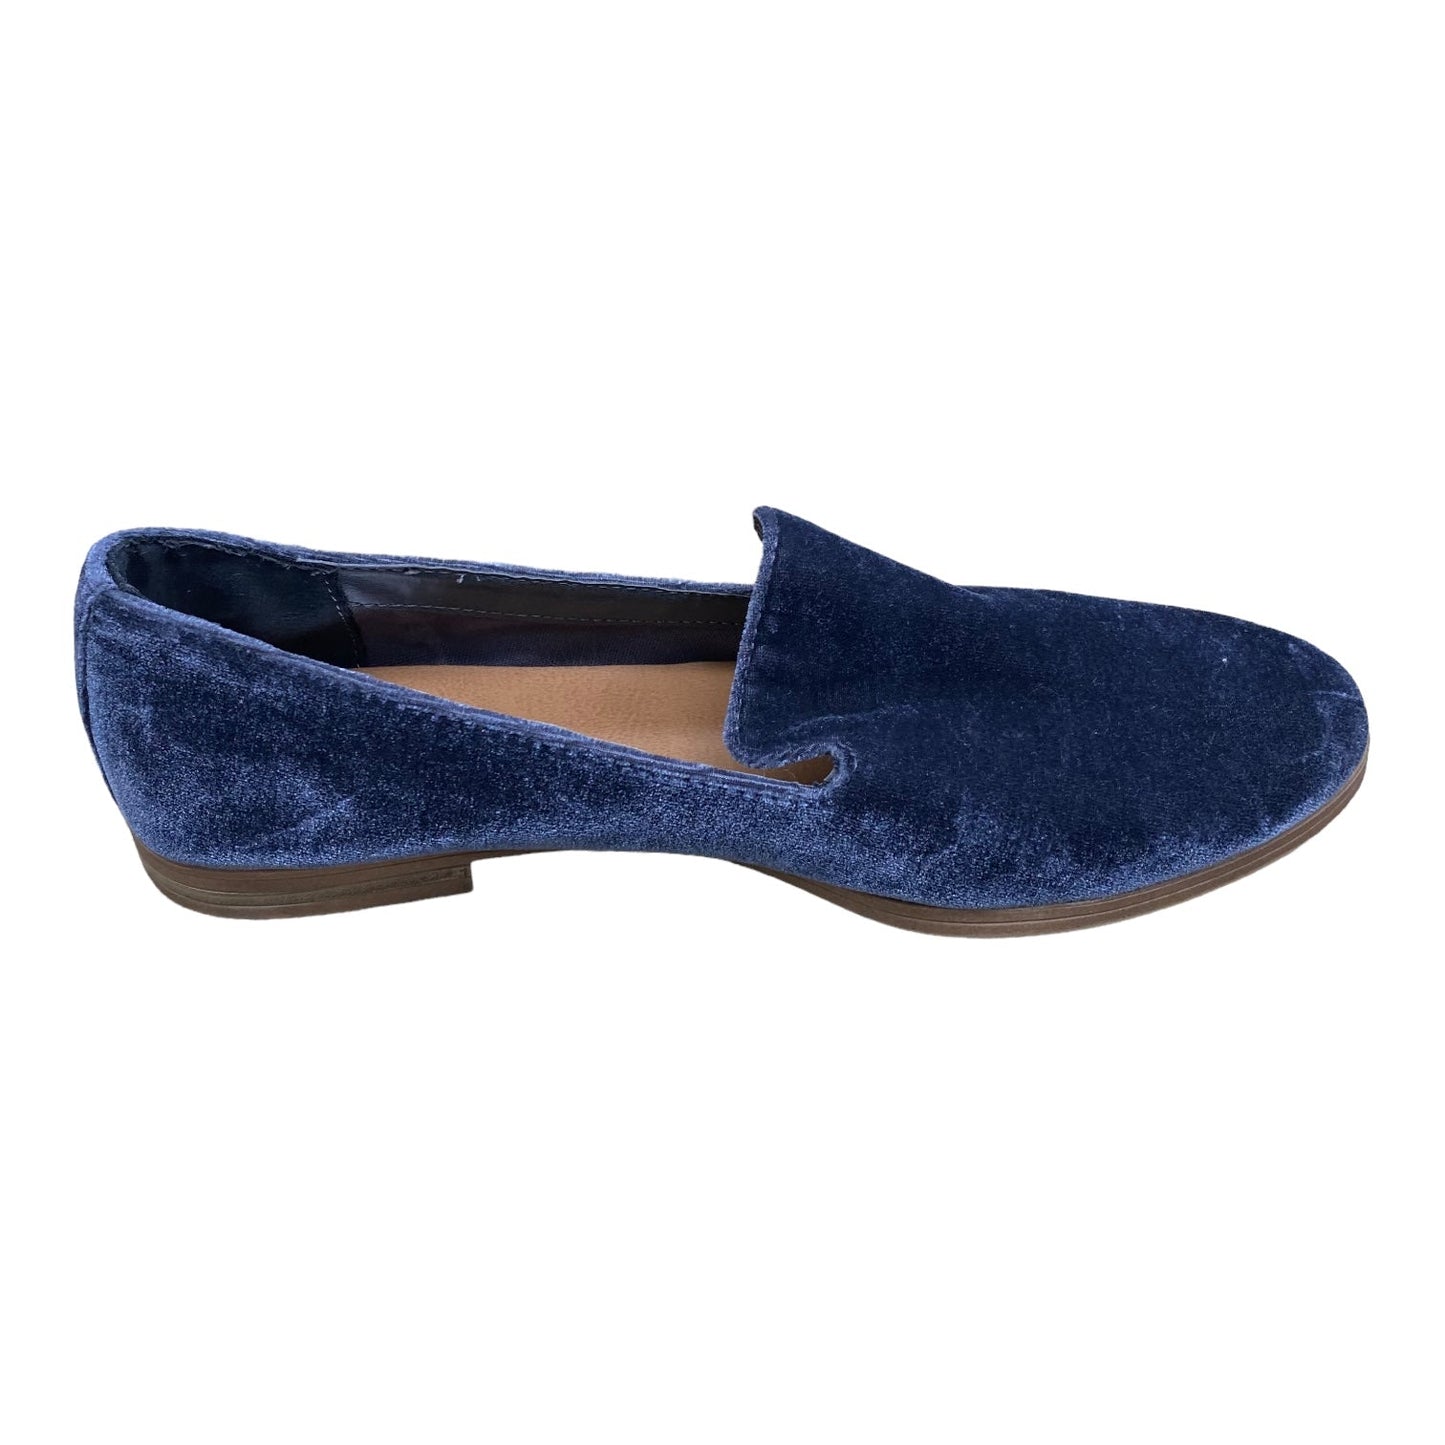 Shoes Flats Espadrille By Dolce Vita  Size: 10